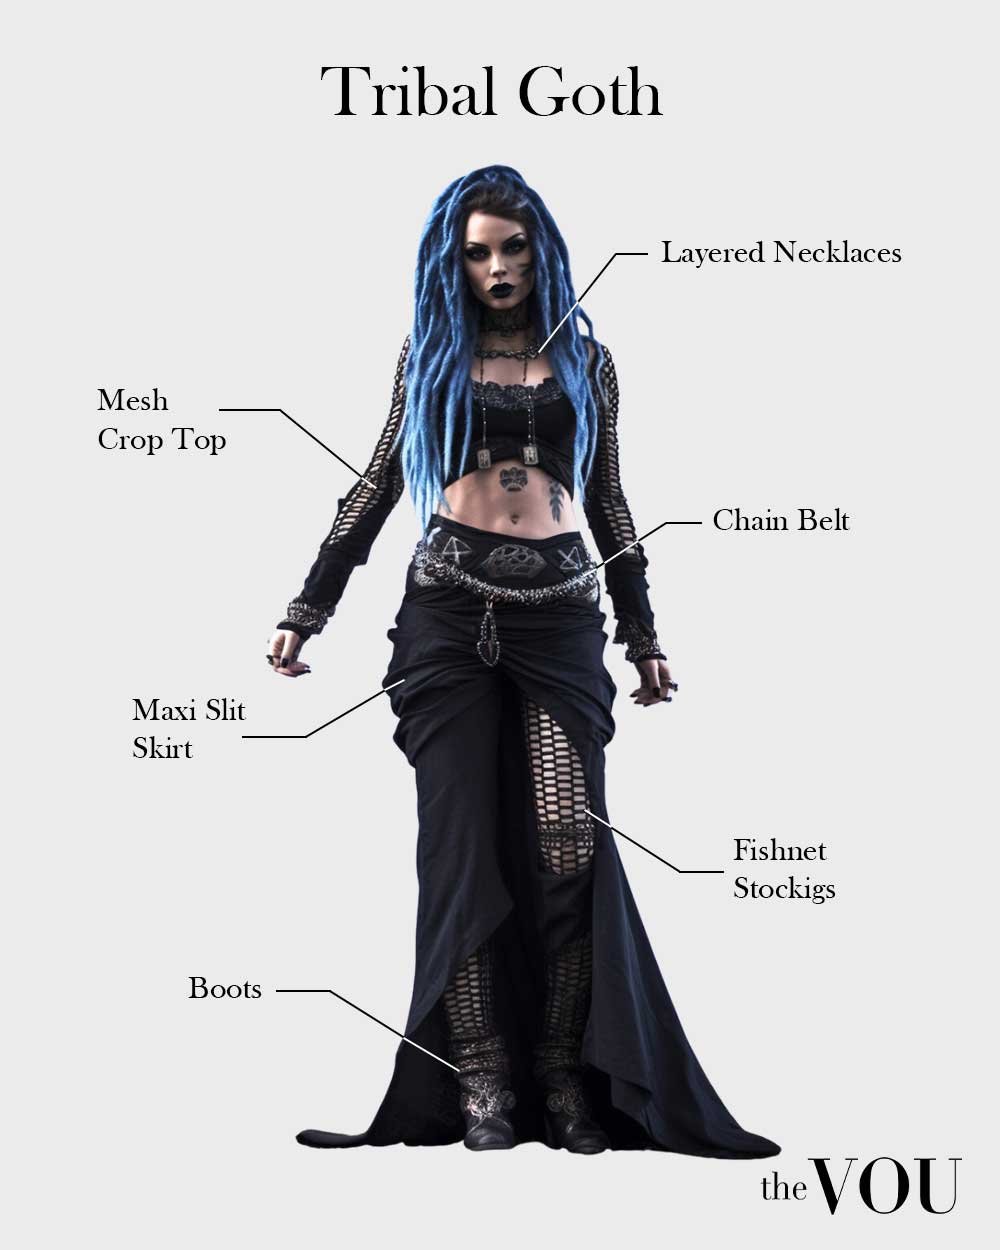 How to Dress Goth: 25 Variations to Master the Gothic Look